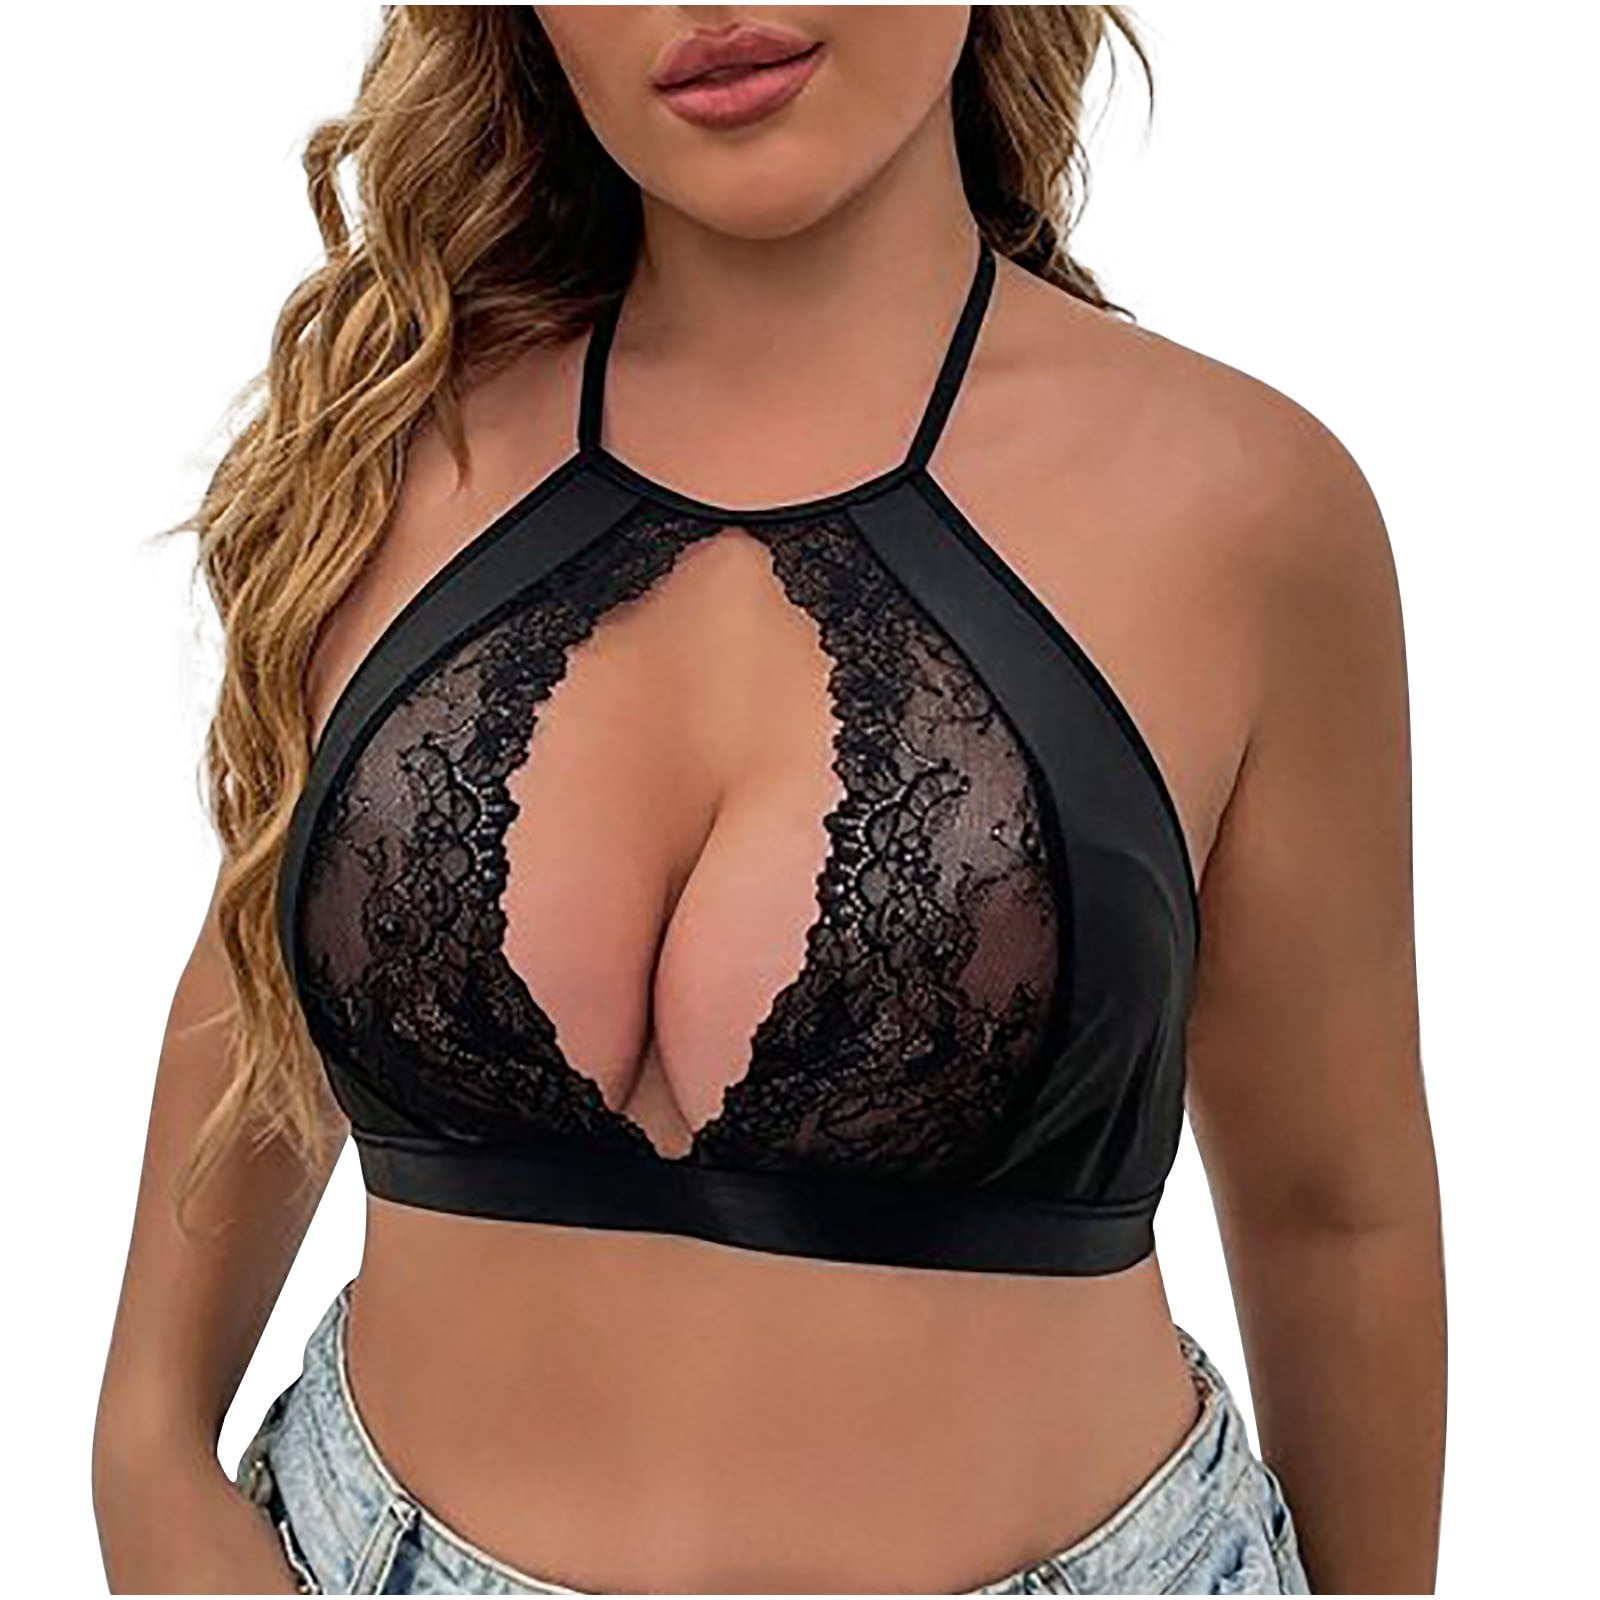 YYDGH Women's Sheer Lace Bralette Halter High Neck Racerback Wireless Sexy  See Through Bra Hollow Out Backless Buster Top Black XL